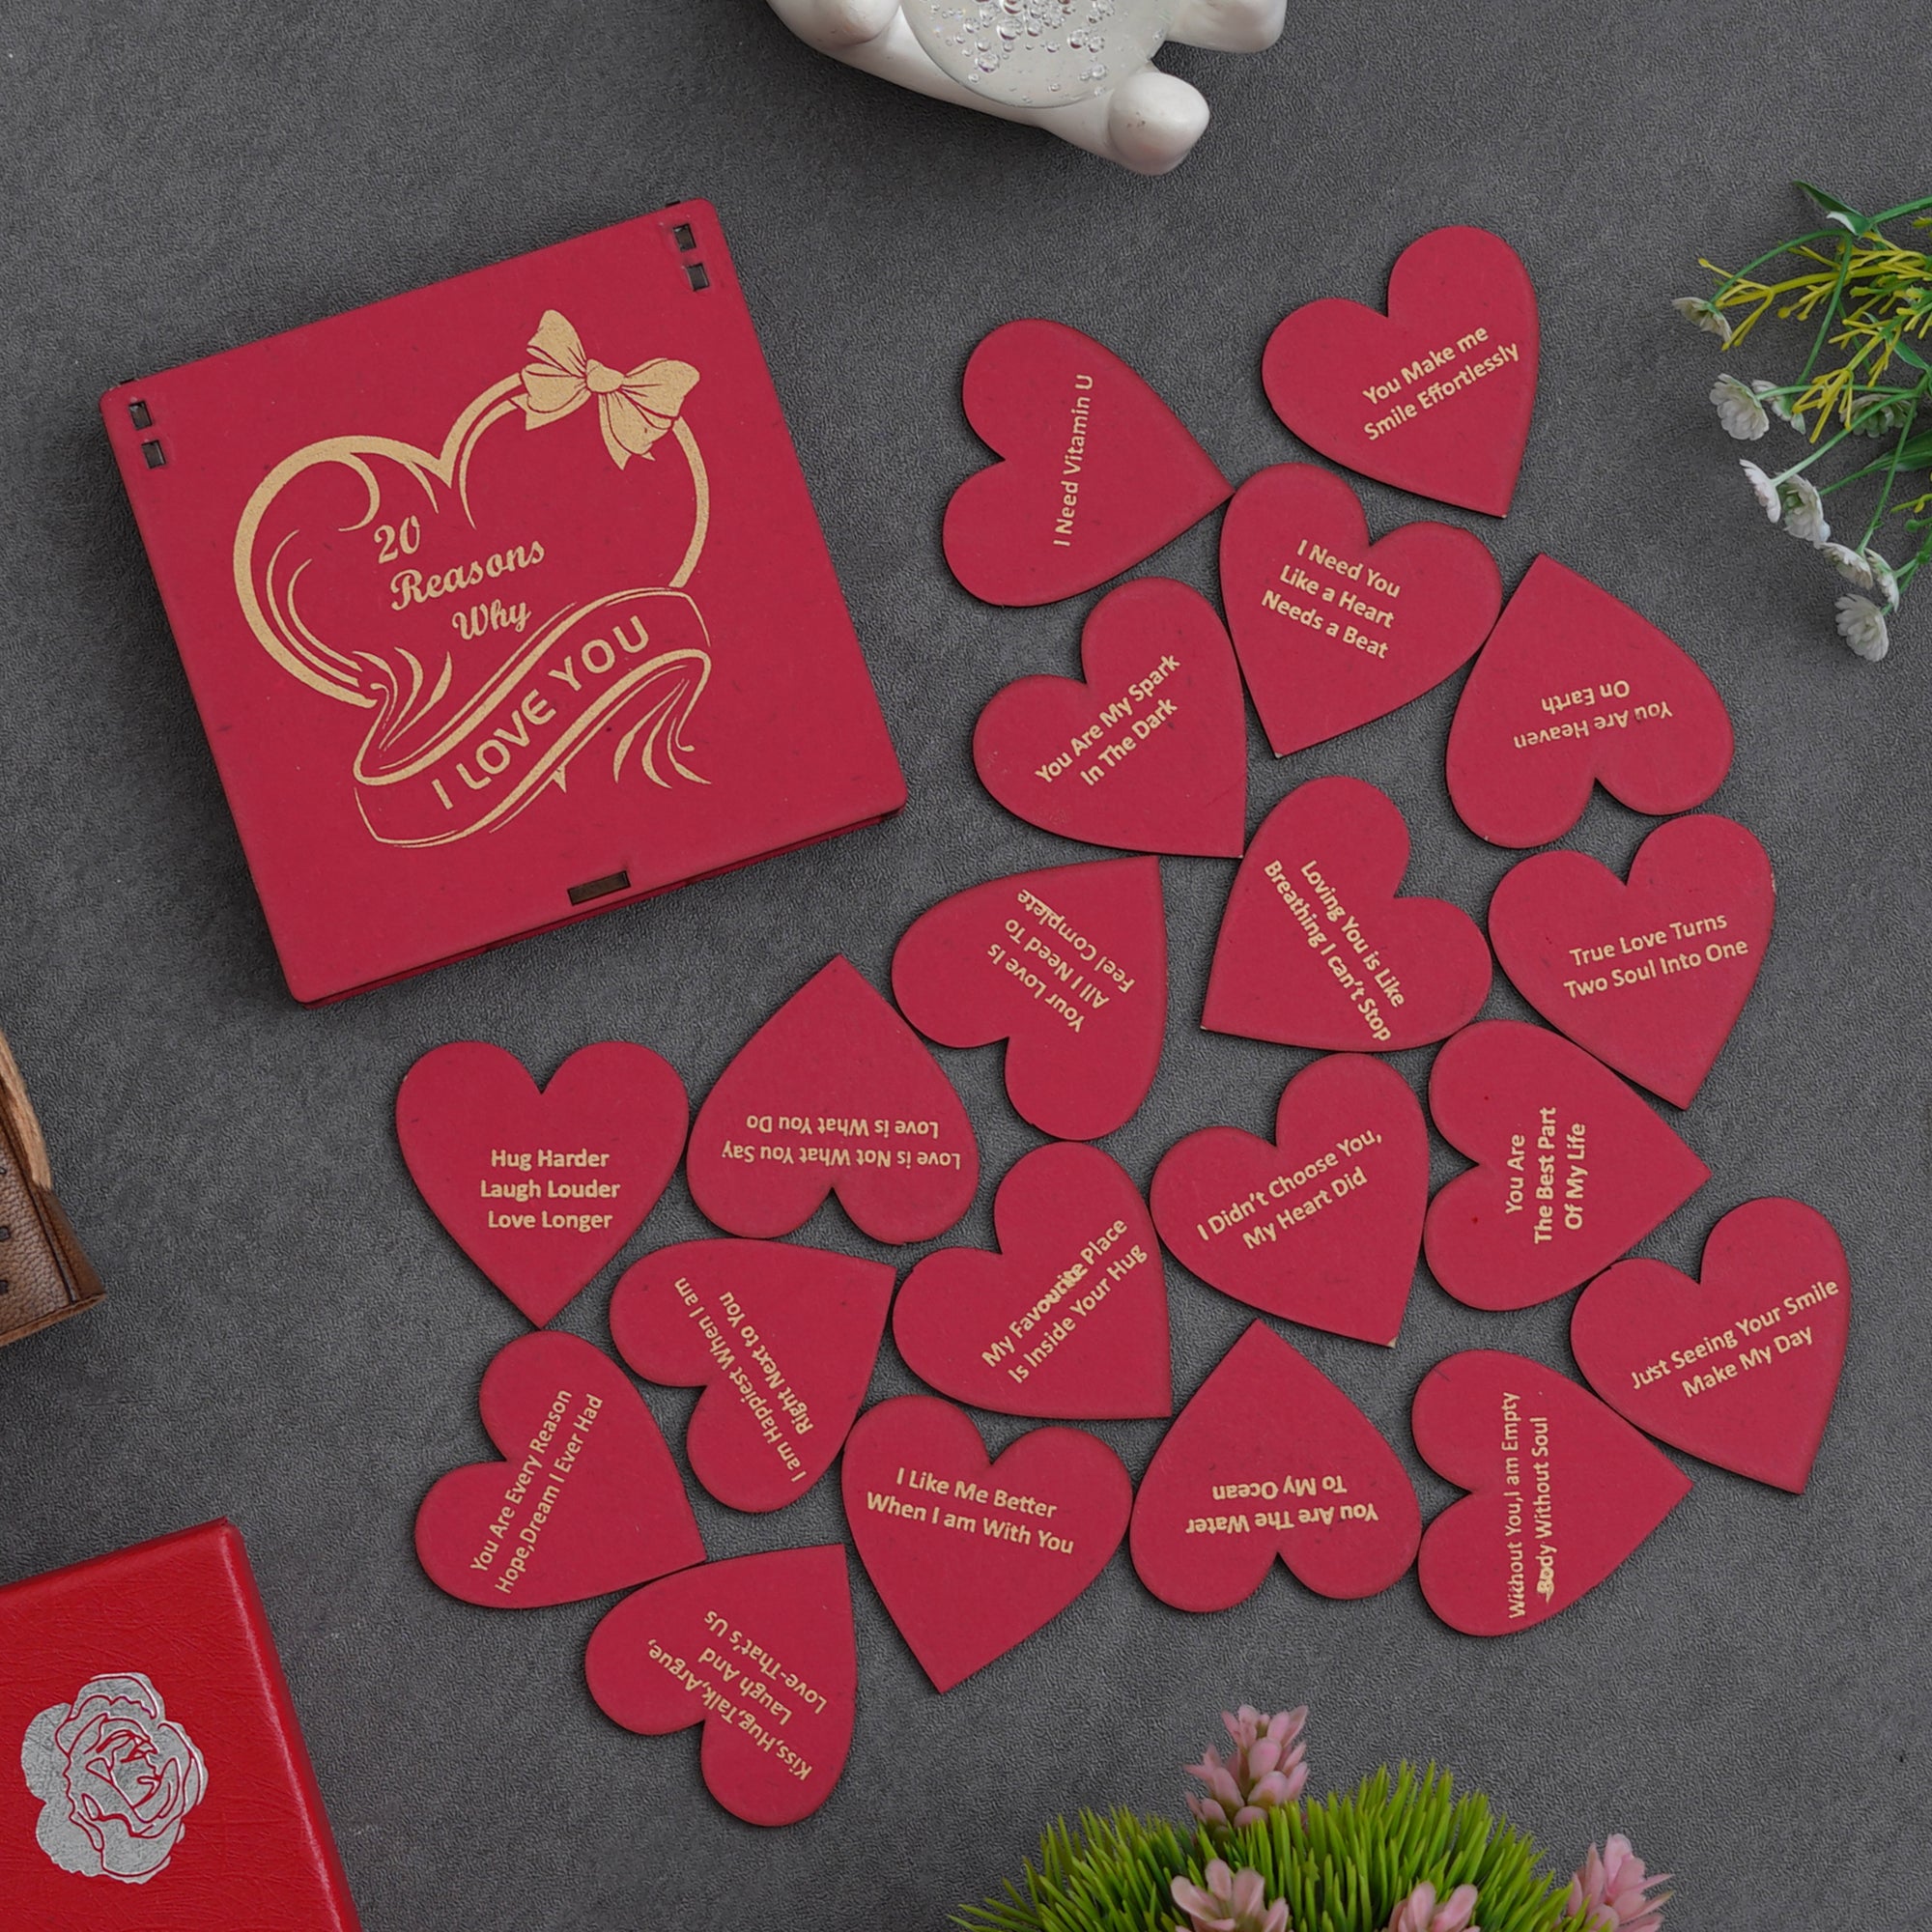 Valentine Combo of Pack of 8 Love Gift Cards, Golden Red Rose Gift Set, "20 Reasons Why I Love You" Printed on Little Red Hearts Decorative Wooden Gift Set Box 5